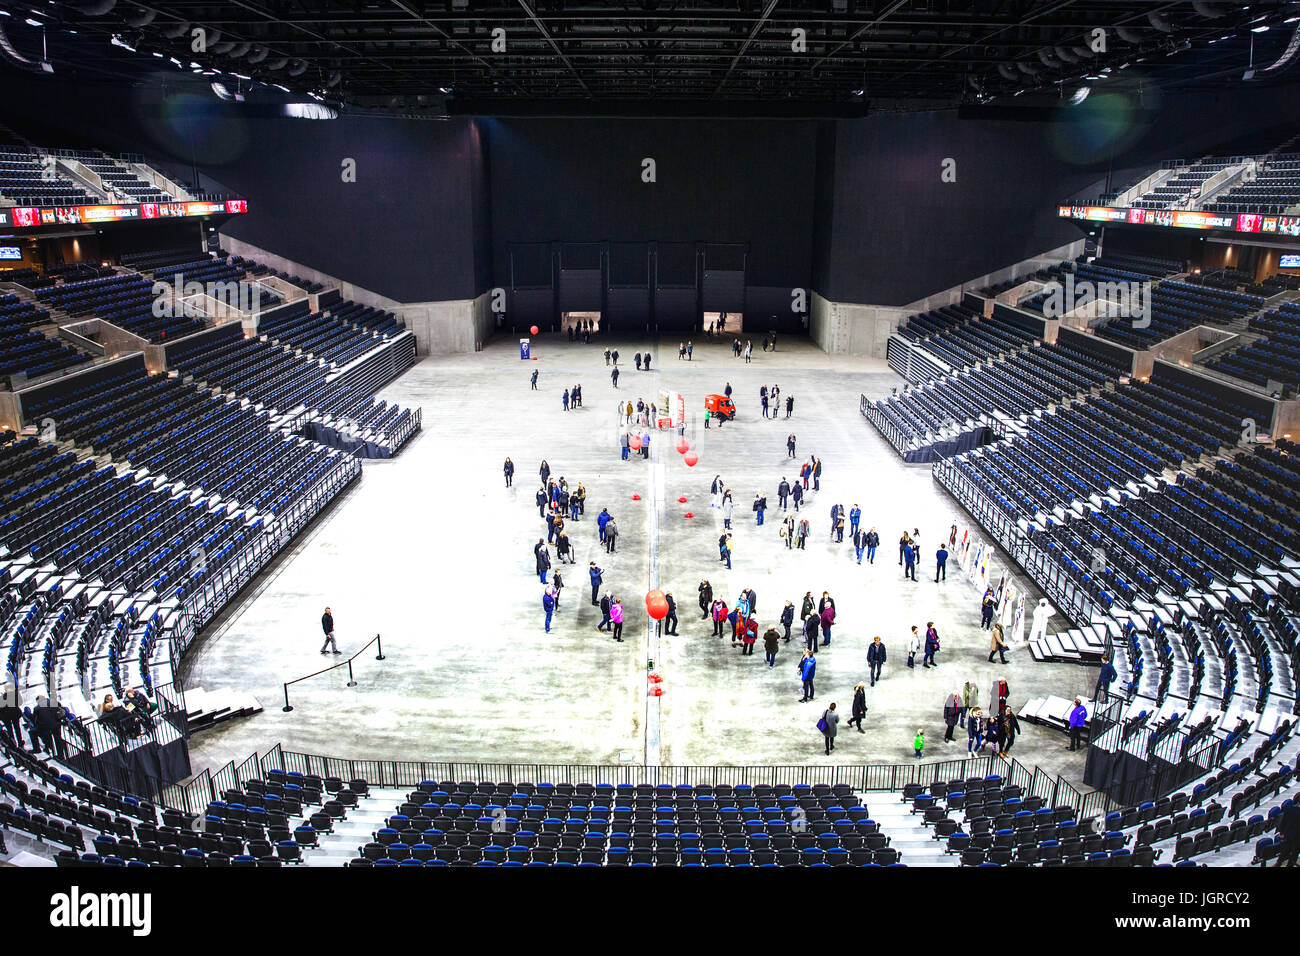 Inside the Royal Arena, which is an indoor cultural meeting place in  Copenhagen, Denmark. The Arena is known for its Nordic design and was  hosting events such as the Eurovision Song Contest